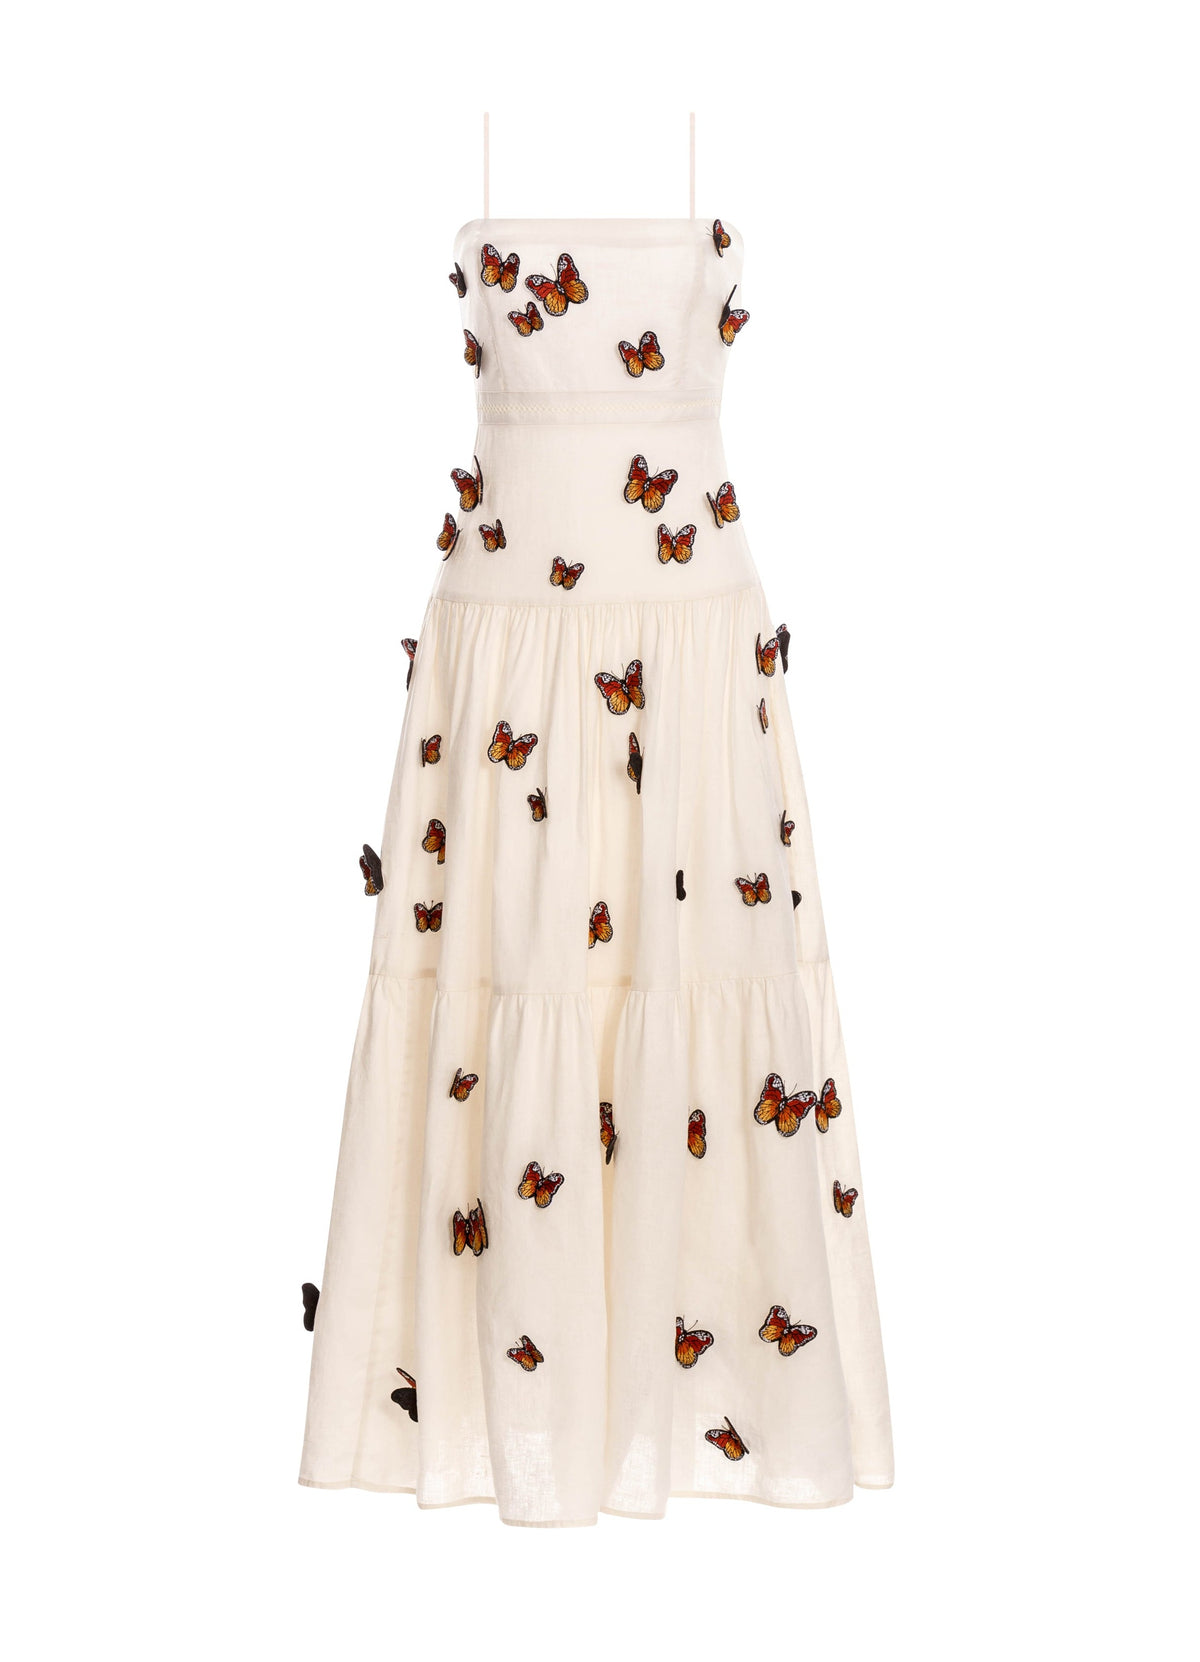 Lima Maxi Dress with Embroidered Butterflies